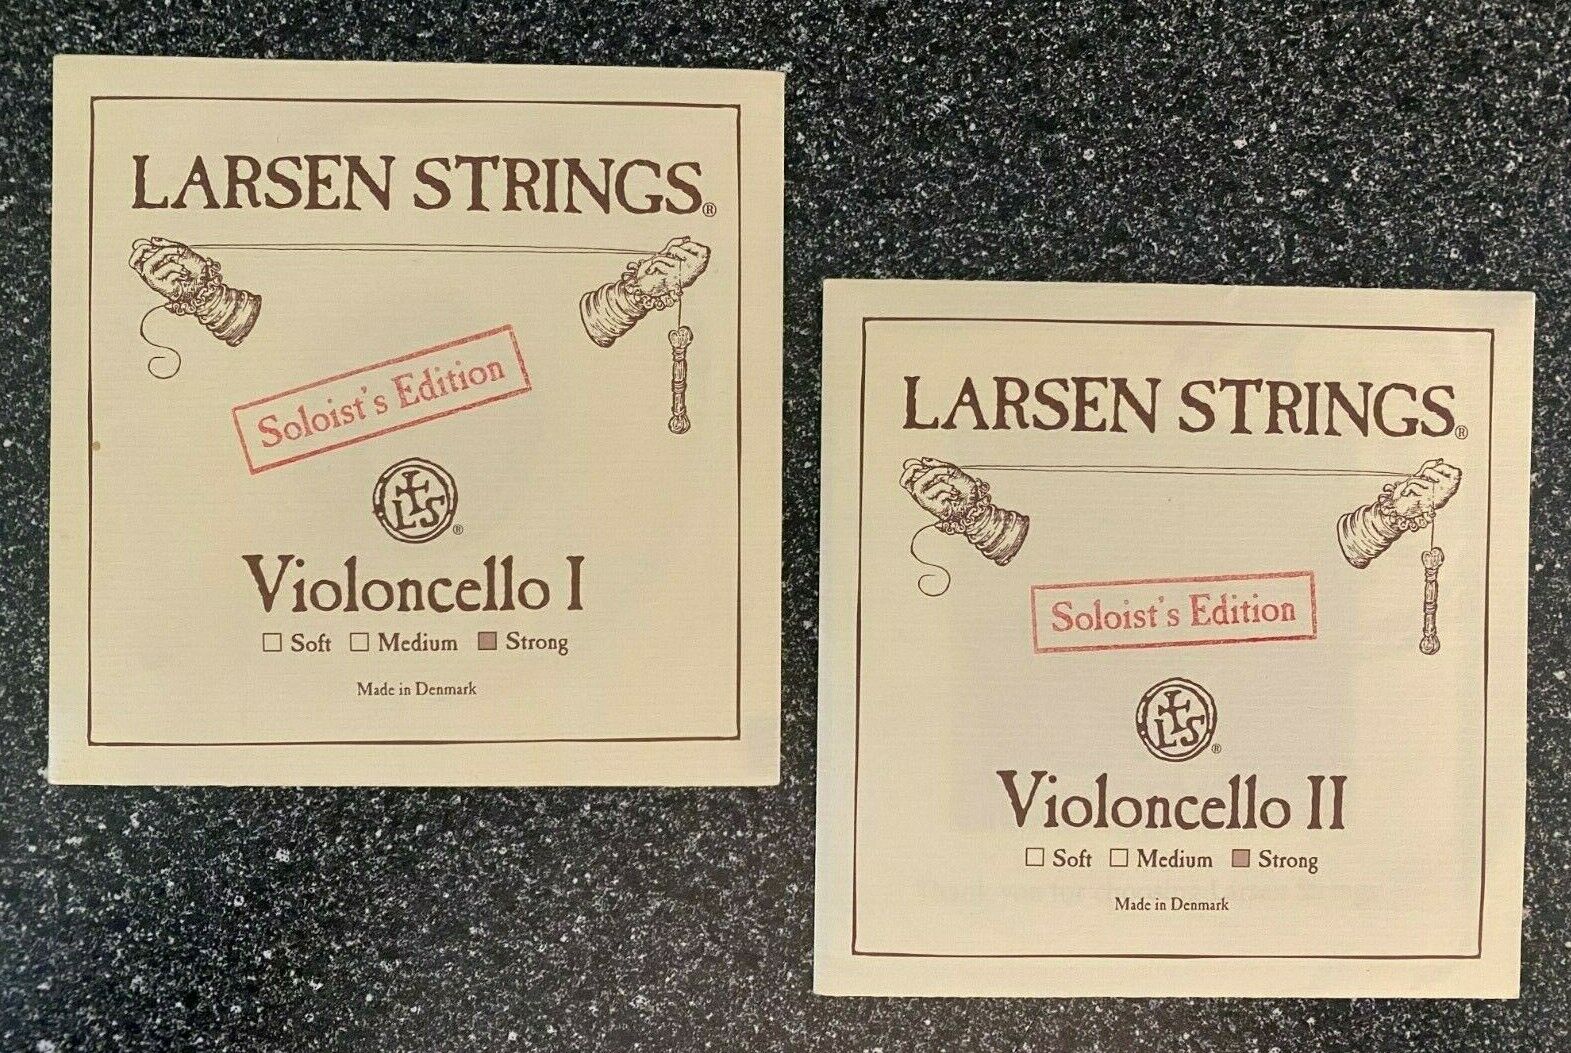 Larsen Strings - Violoncello I & II - Soloist's Edition -Strong (2 total packs) Larsen Does Not Apply